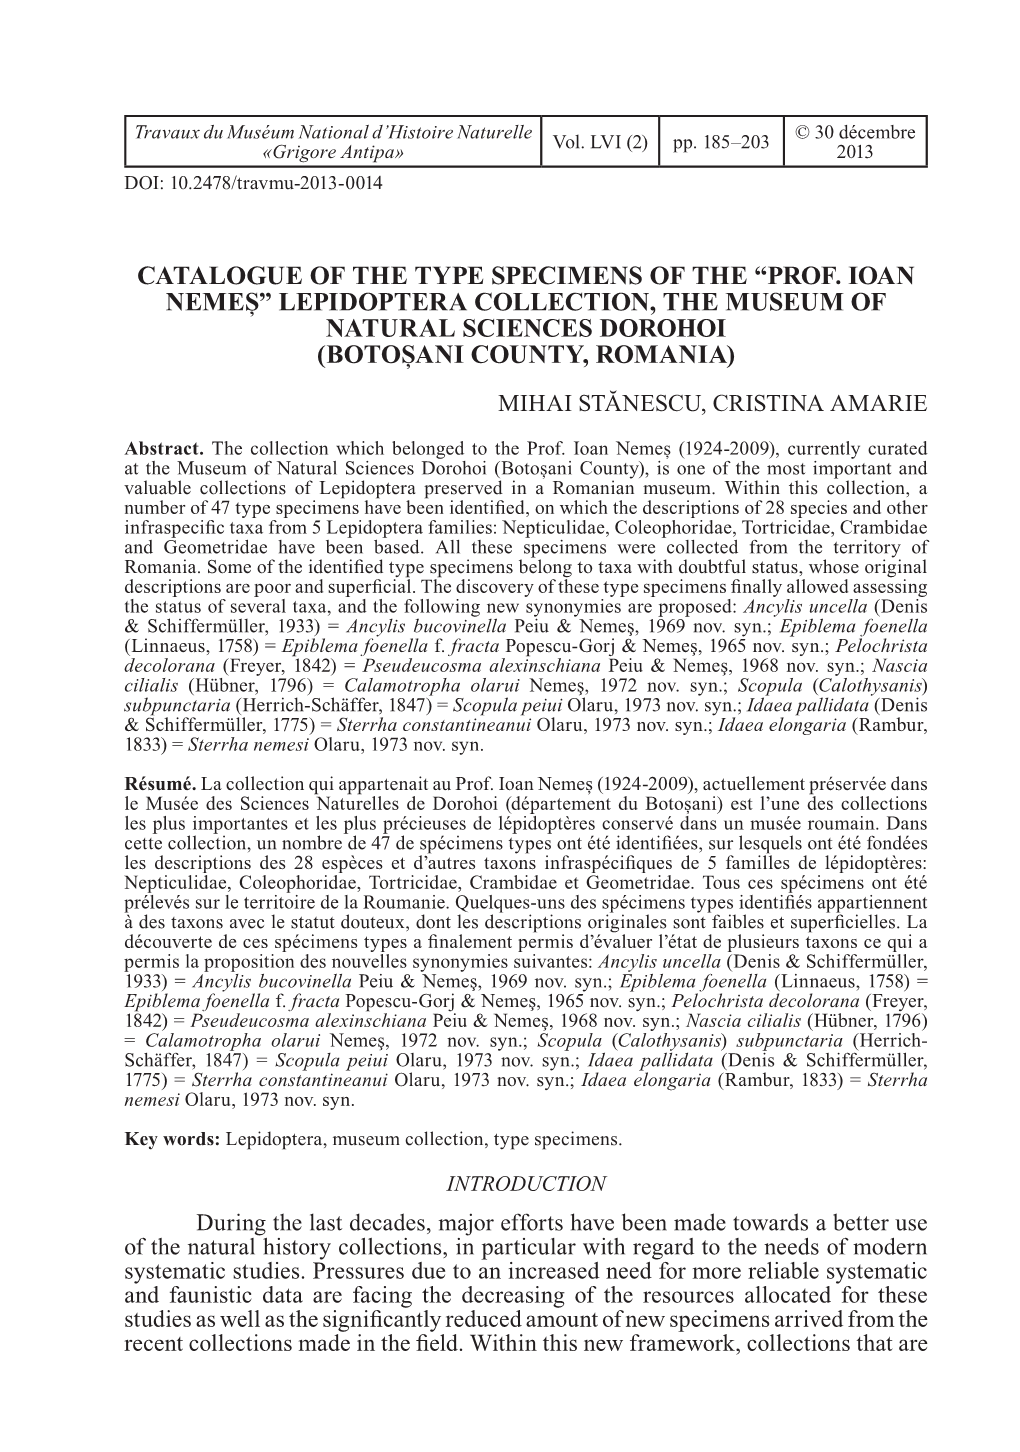 Catalogue of the Type Specimens of the “Prof. Ioan